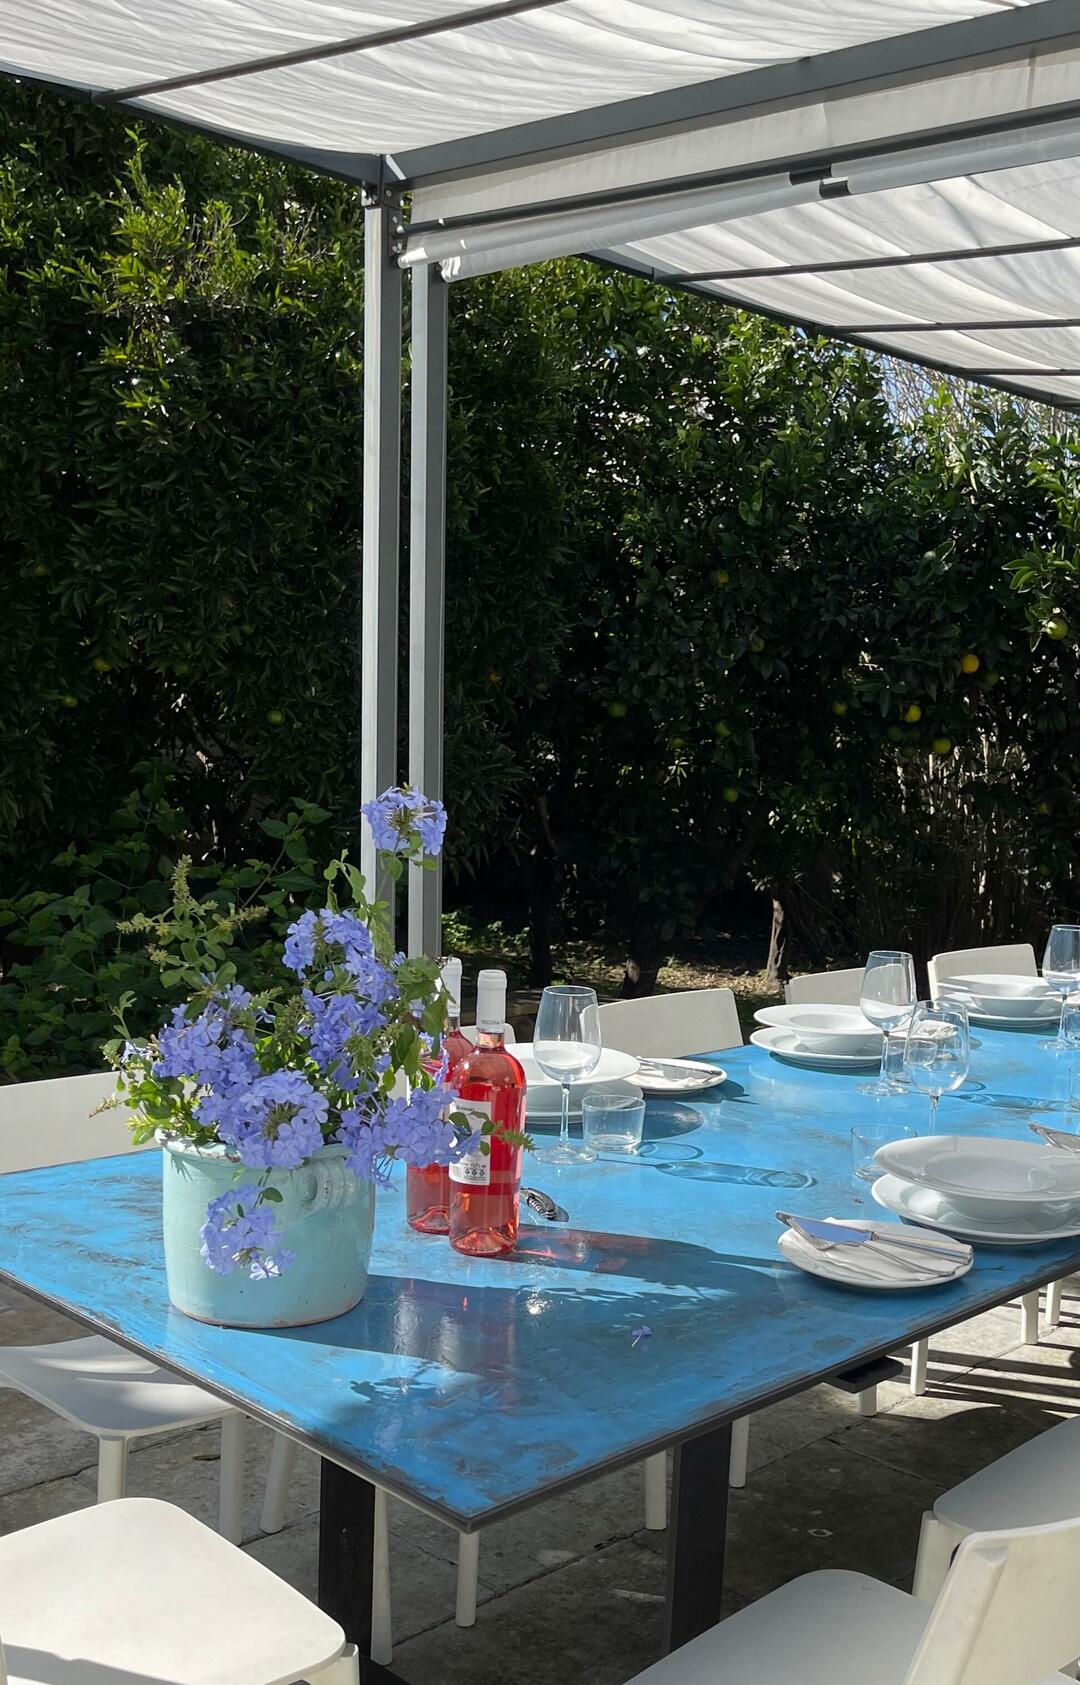 12-seater outdoor table